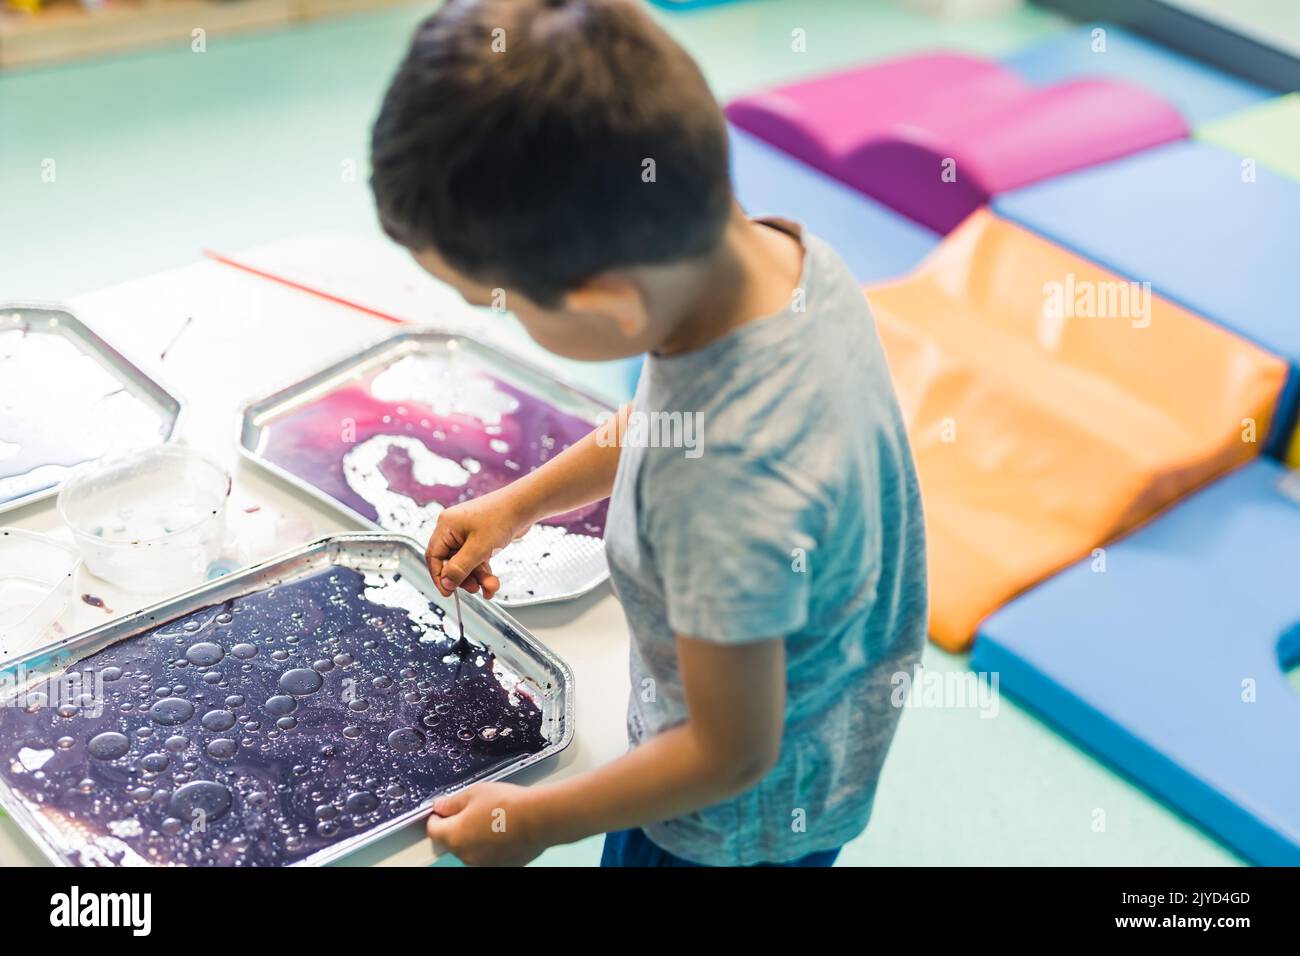 Sensory play for early brain development at nursery school. Toddler boy milk painting with his fingers, using nontoxic food coloring for colors, milk and trays. Creative kids activity for fine motor and gross motor skills development. High quality photo Stock Photo